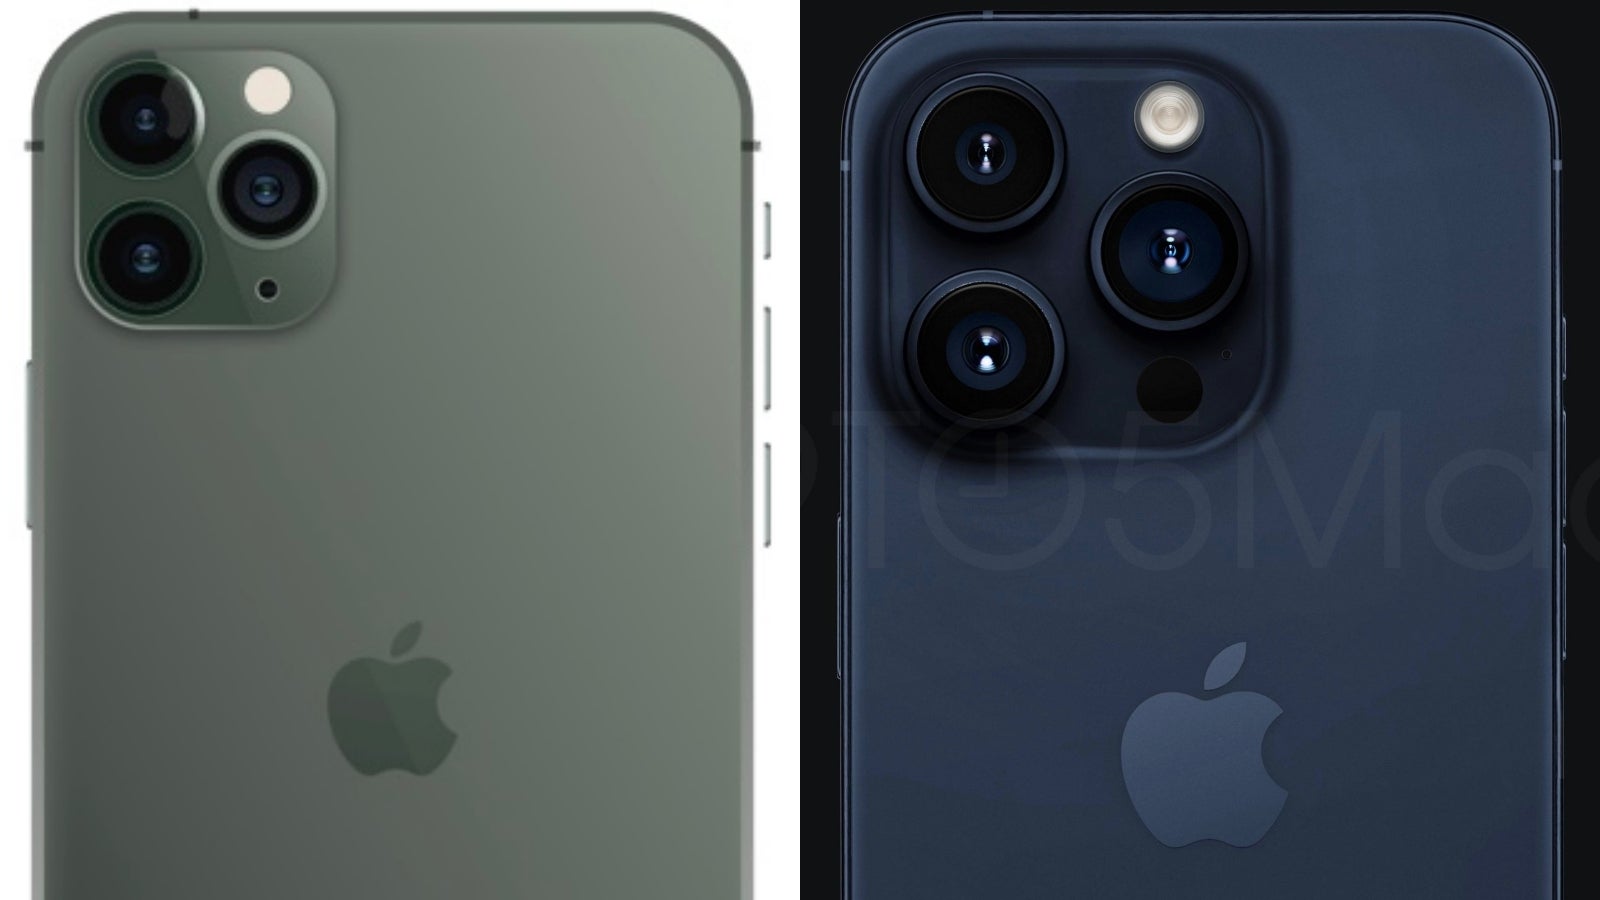 Four years later, iPhone 15 Pro looks like a refined version of the iPhone 11 Pro. But is this a good thing? - iPhone 15 Pro: Another “S” year for Apple’s flagship means some people should wait for iPhone 16